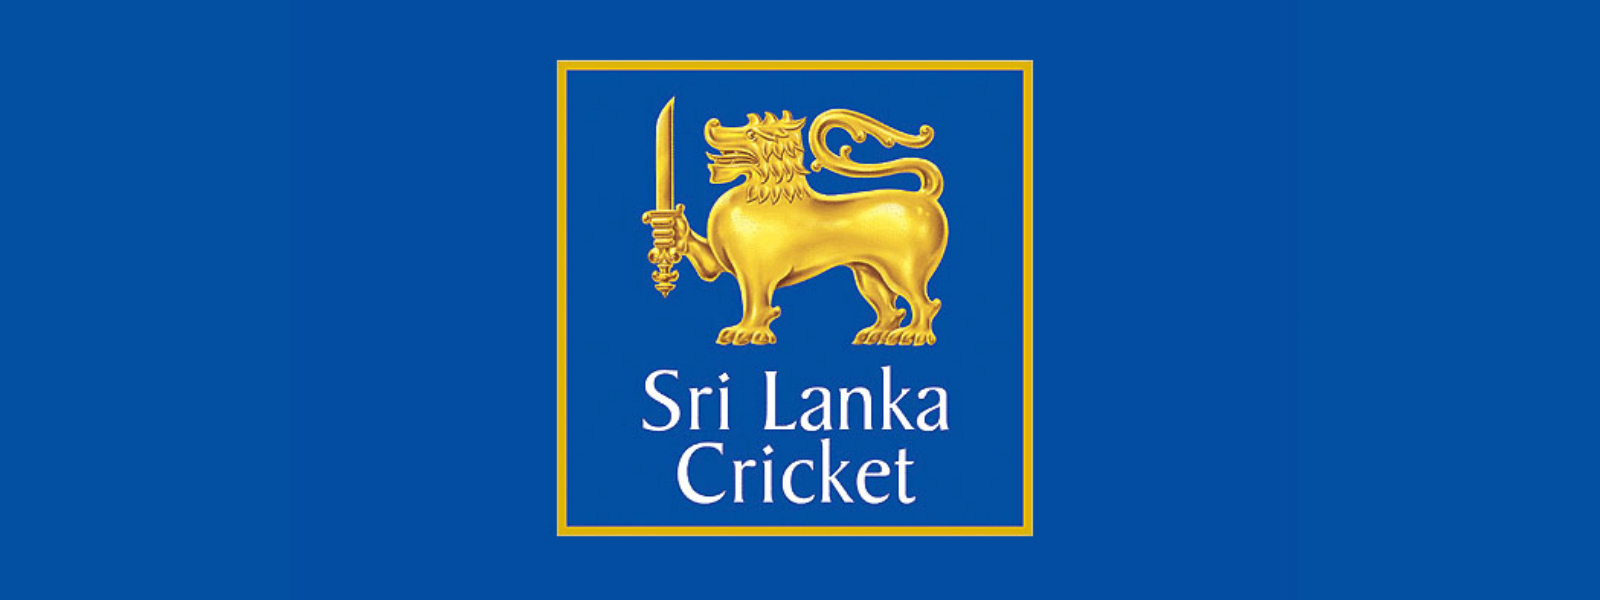 SLC apologies to cricket fans over assault 